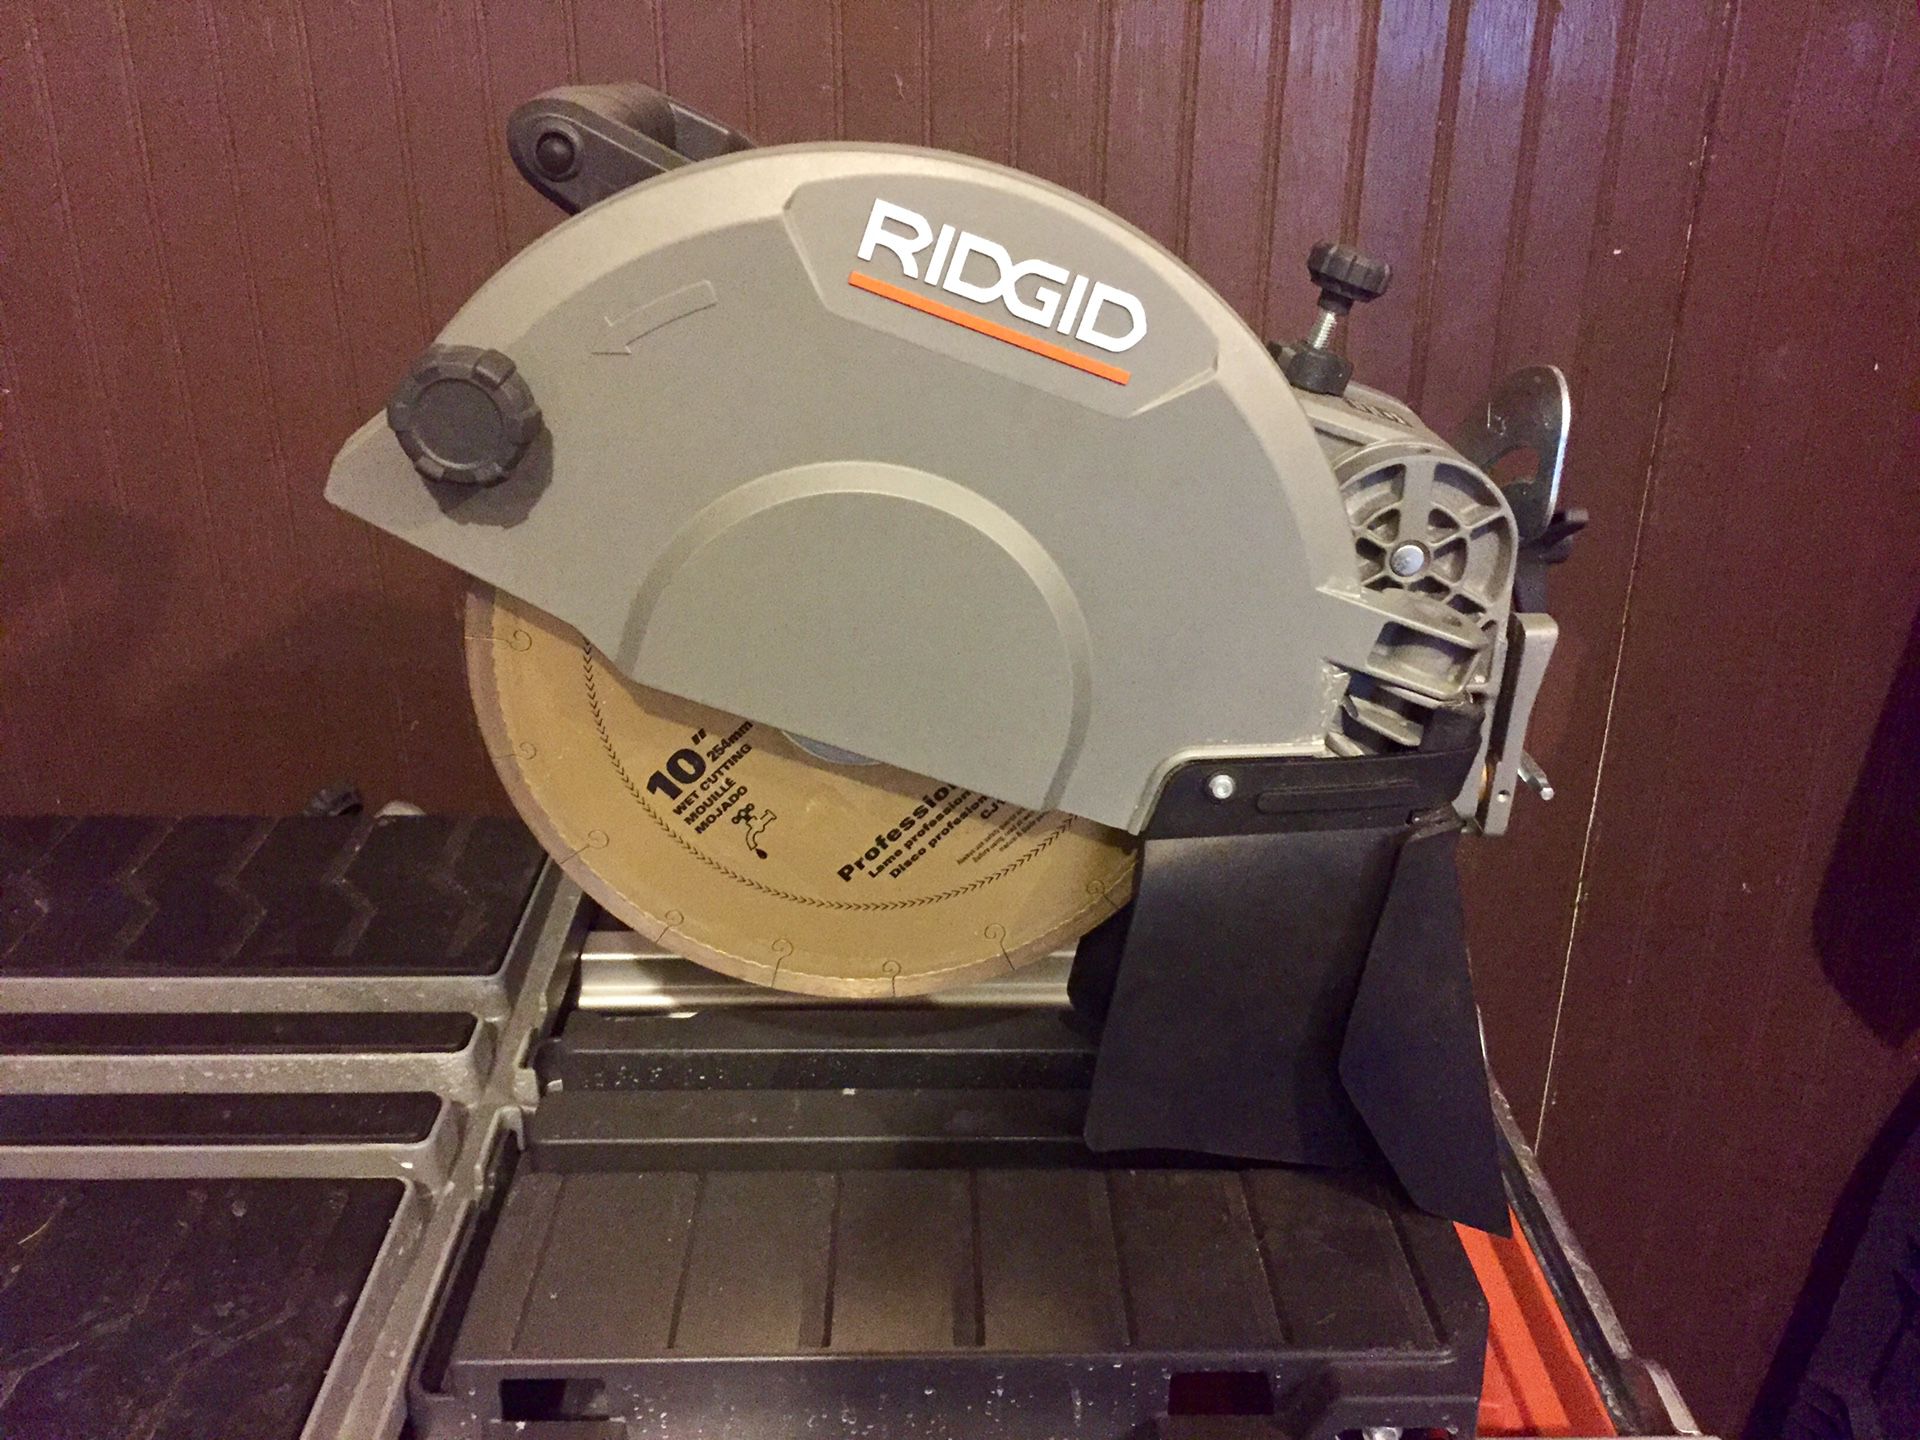 Like New 10” Rigid Commercial Grade Wet Tile Saw, Stand & A Bunch Of Masonry/Tile Tools - Excellent Condition!